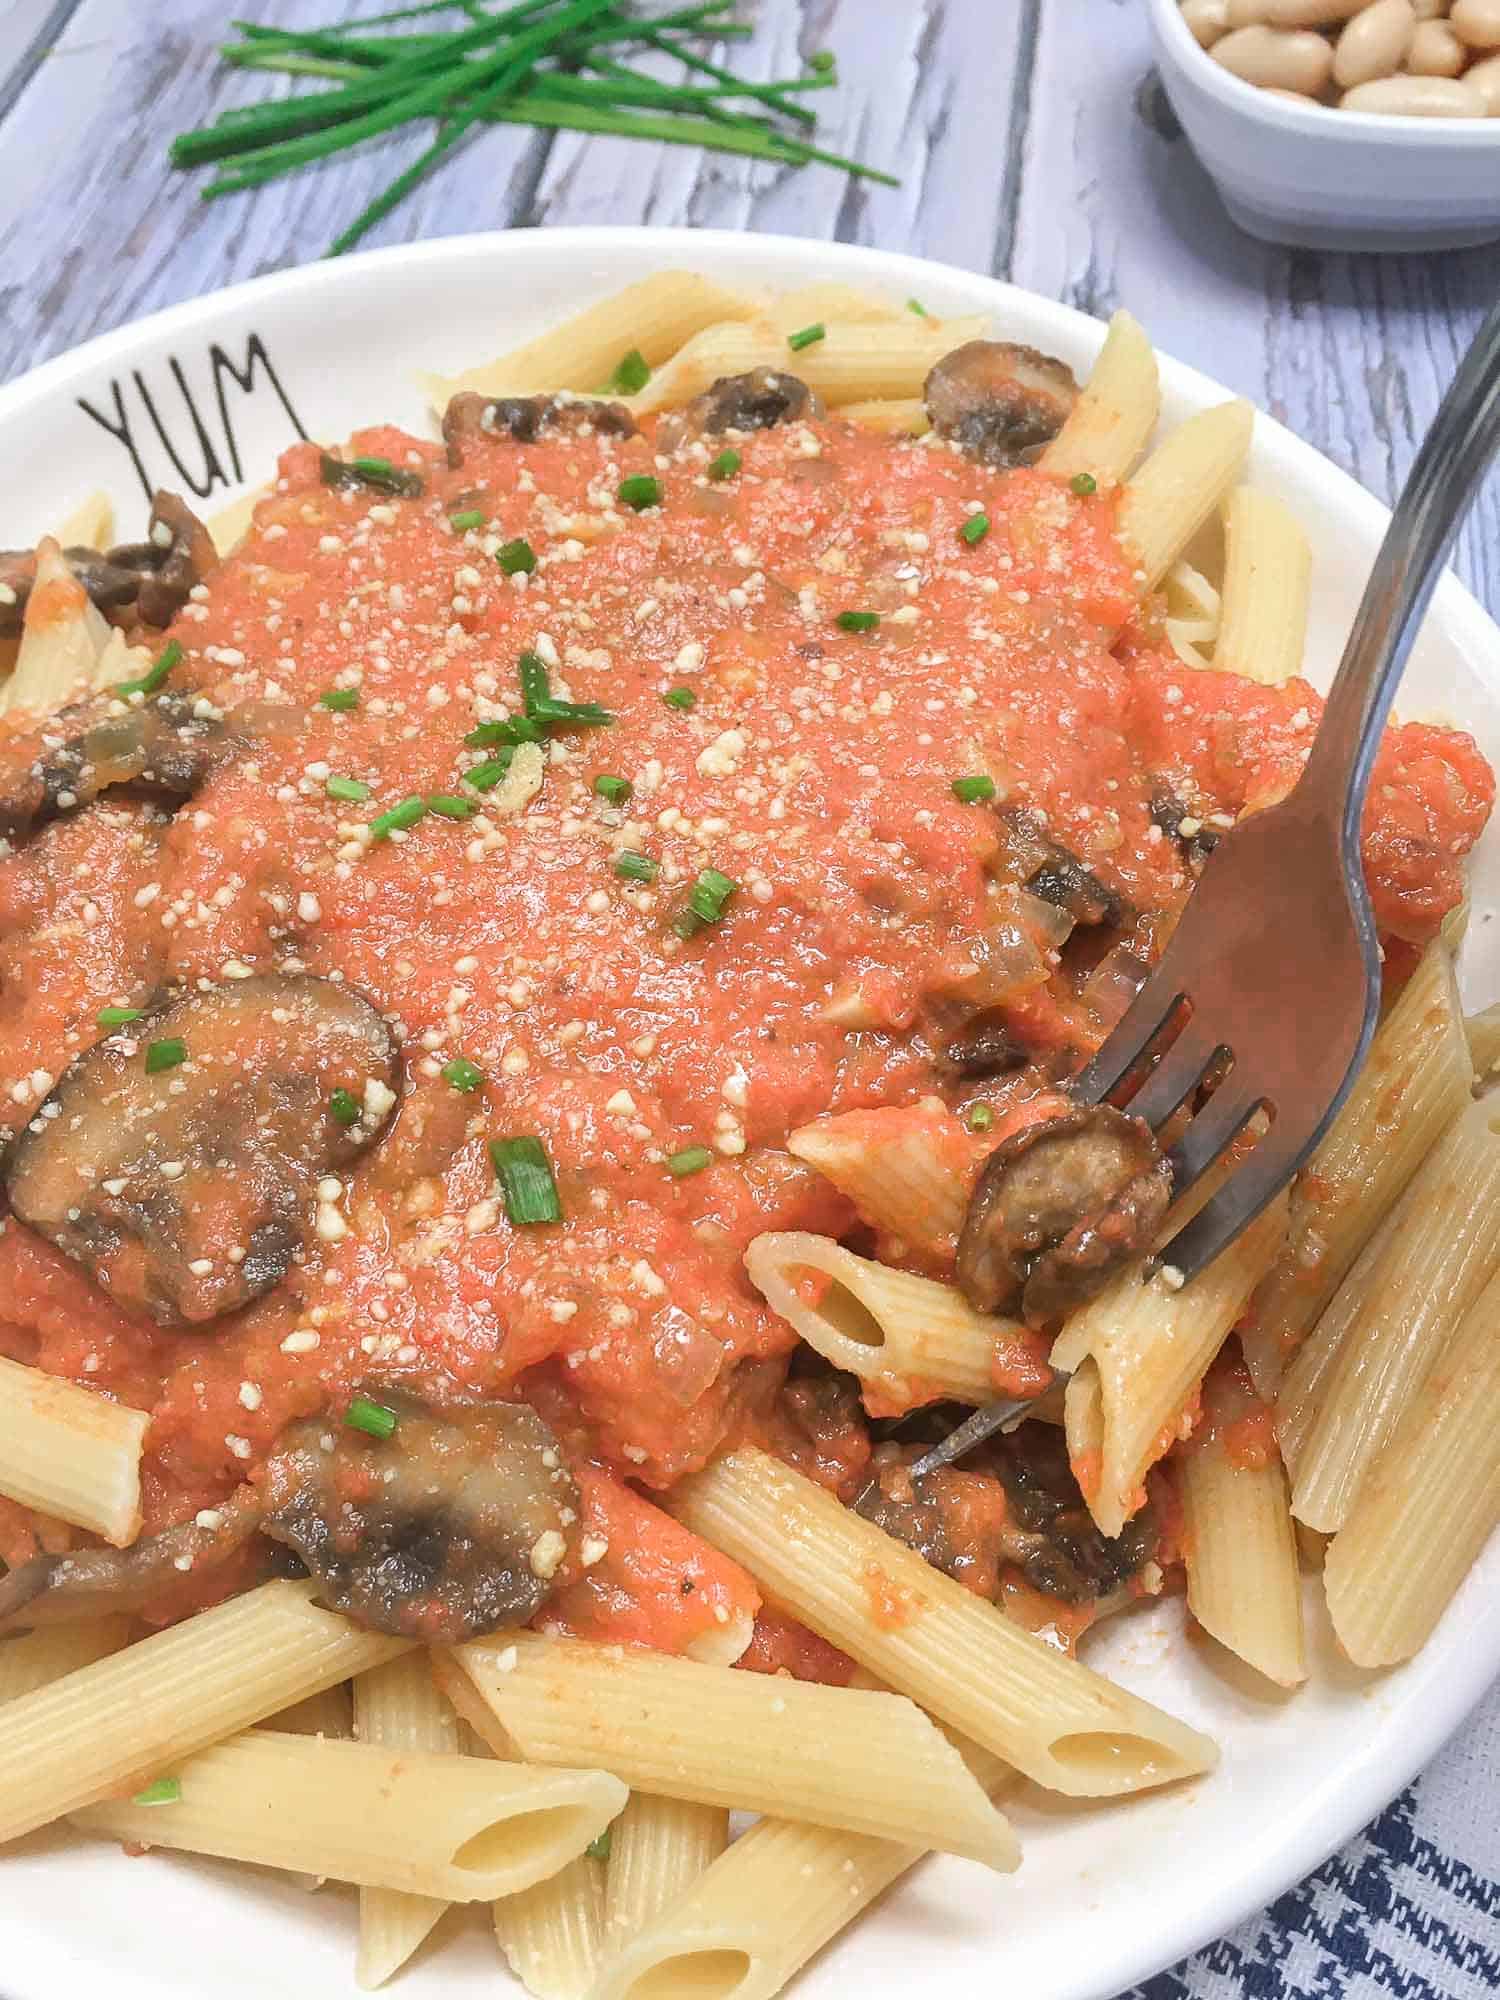 Penne pasta topped with a light red sauce with mushrooms springkled with yellow flakes and chopped herbs